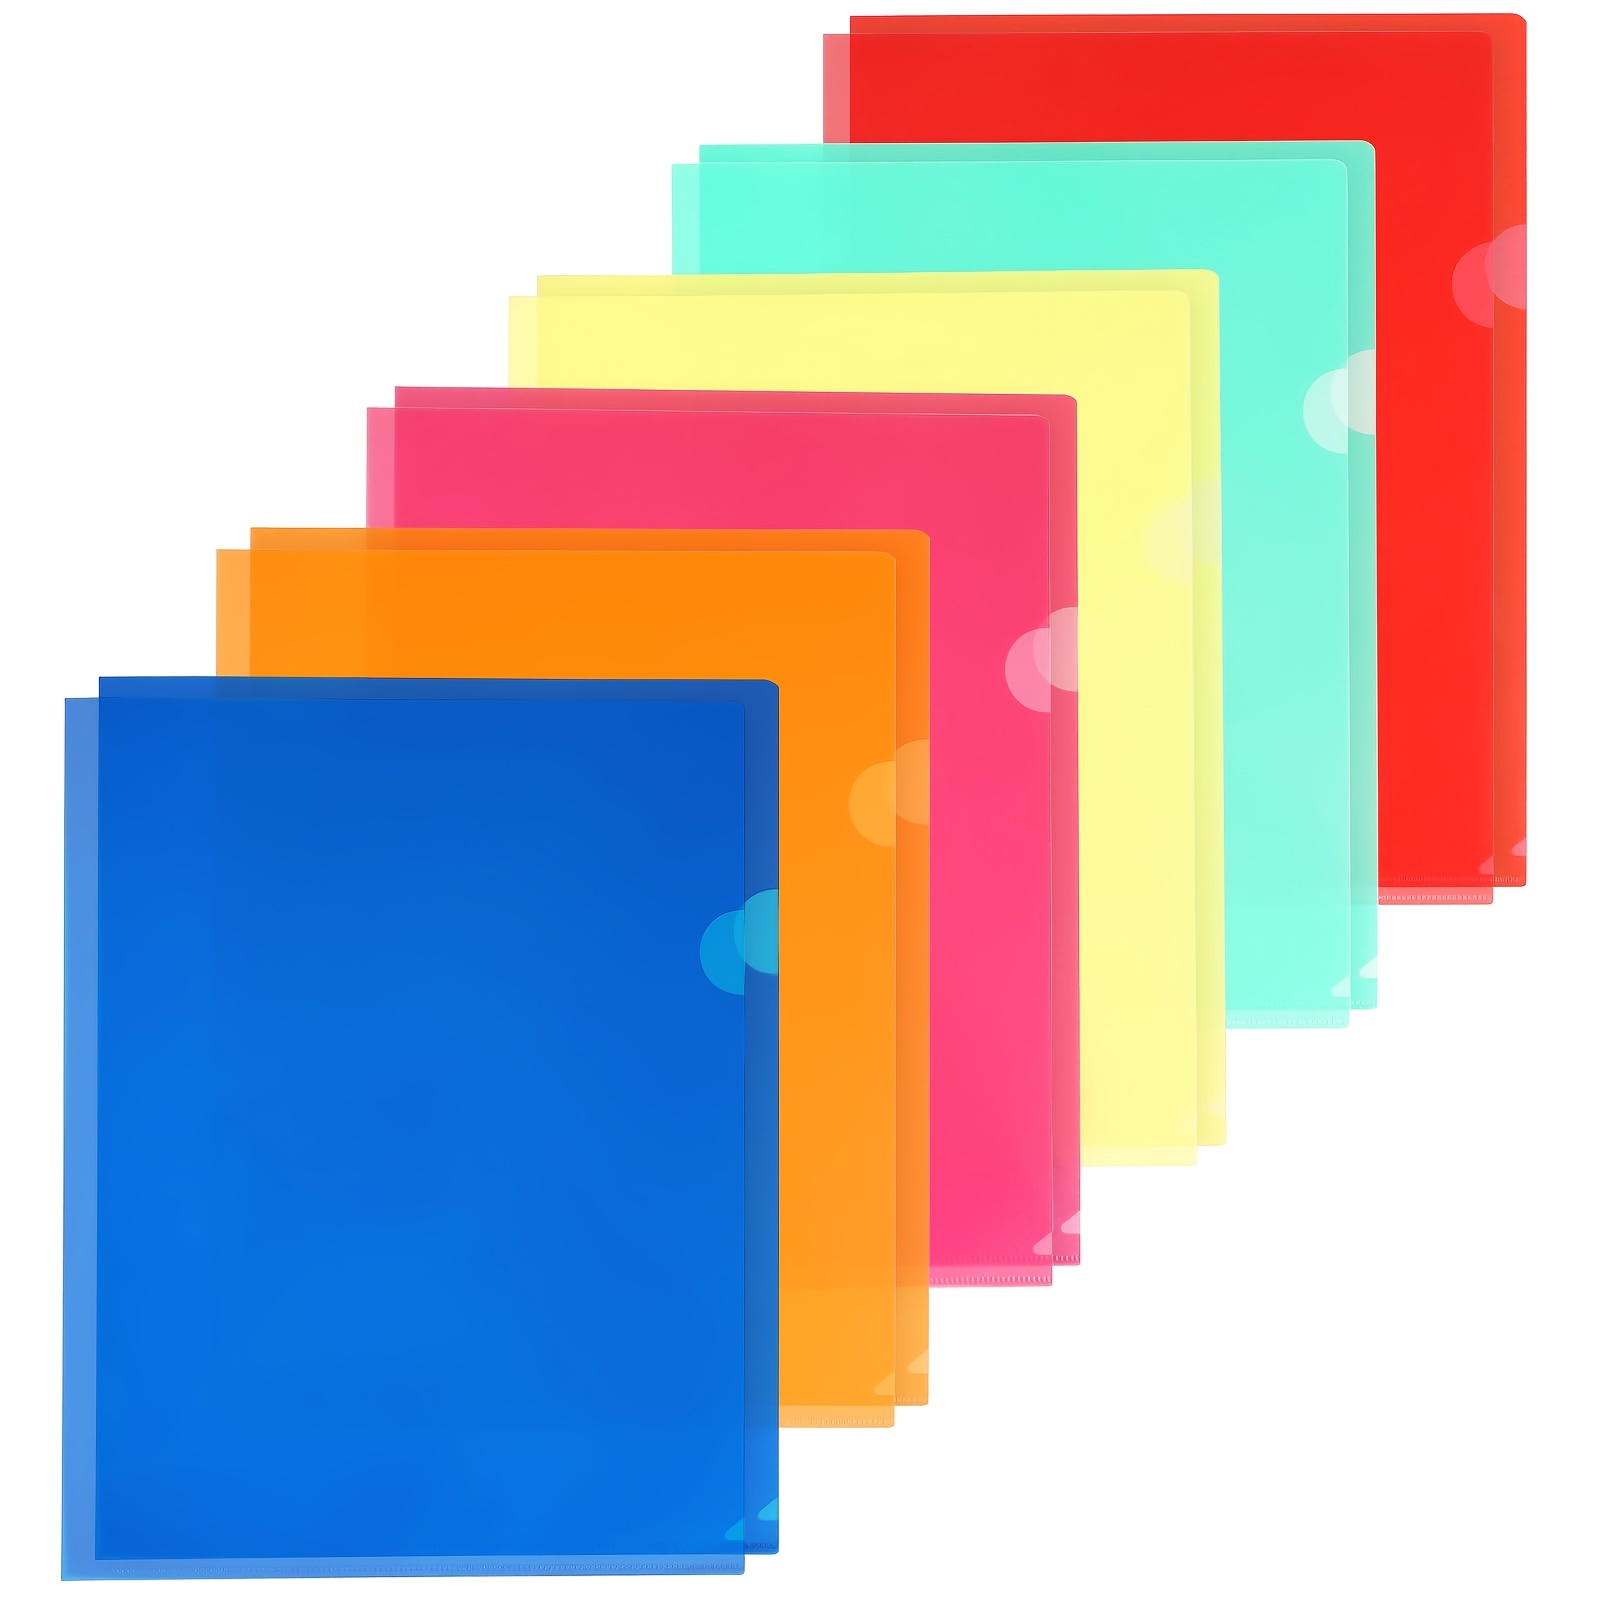  8 Pack Clear File Folders Plastic Project Pockets, Colored  Project Sleeves, Plastic Paper Sleeves Folders for Letter Size and A4 for  School and Office Supplies : Office Products